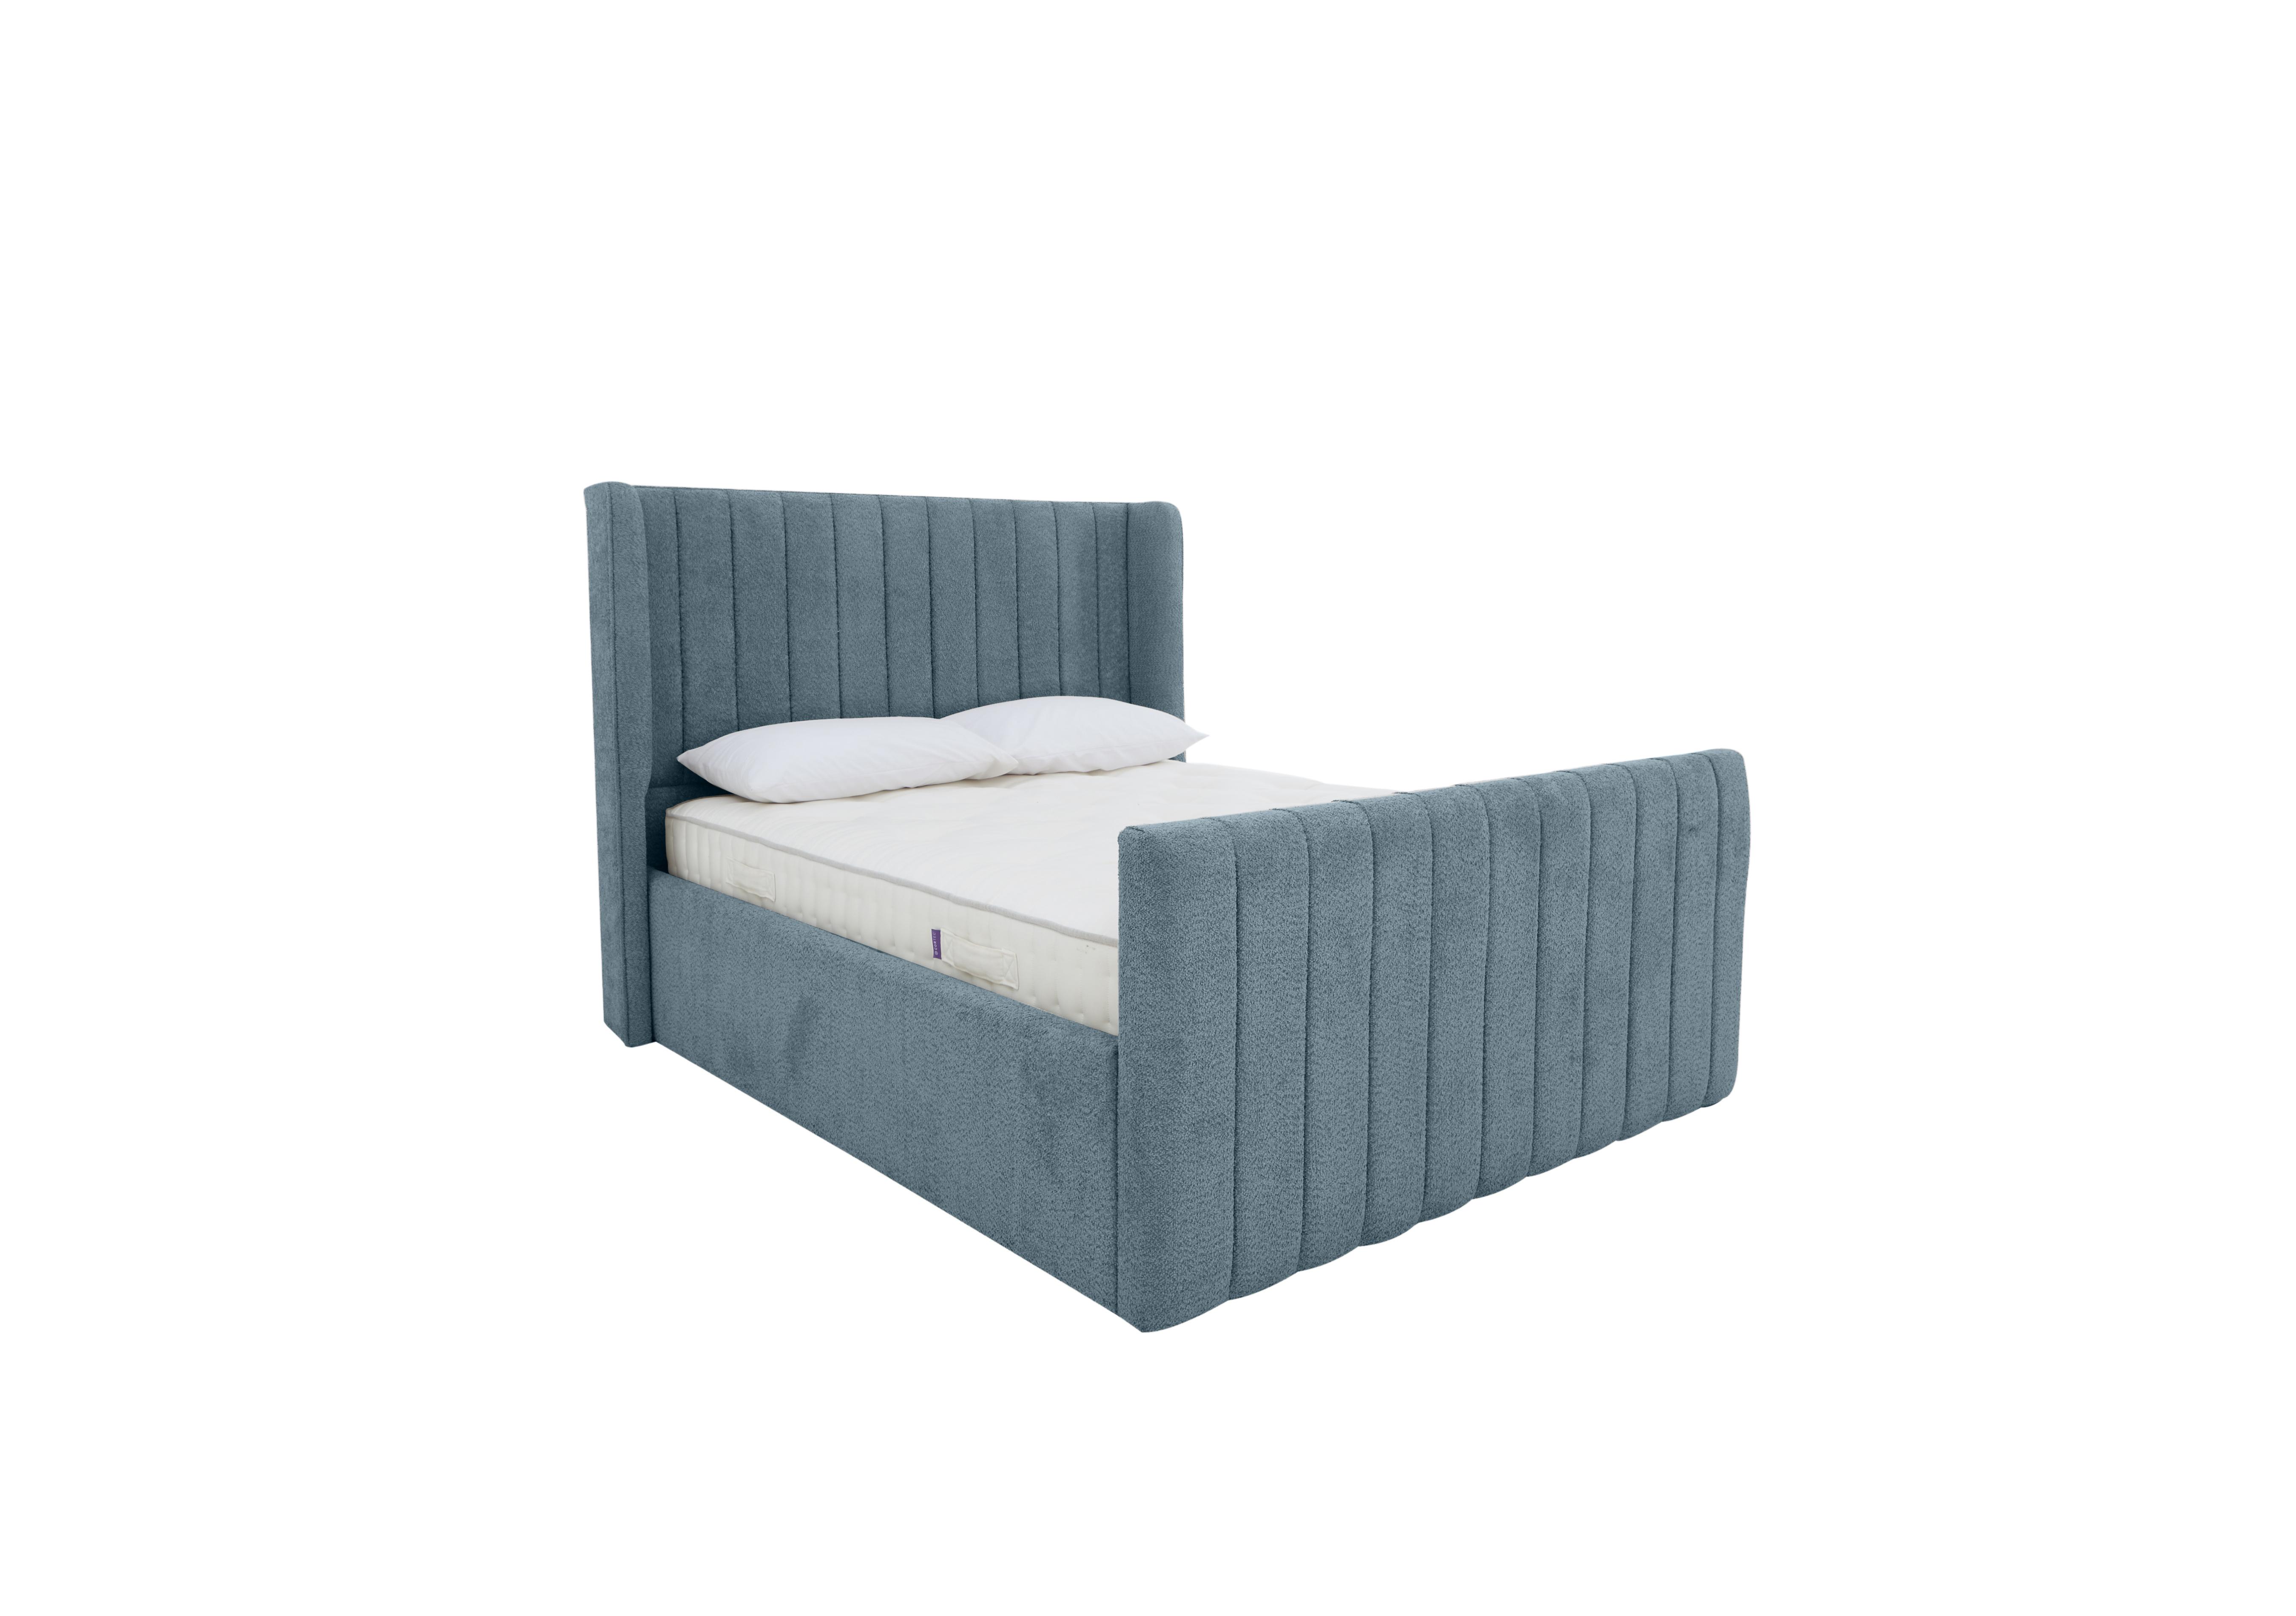 Eira High Foot End Ottoman Bed Frame in Comfy Airforce on Furniture Village